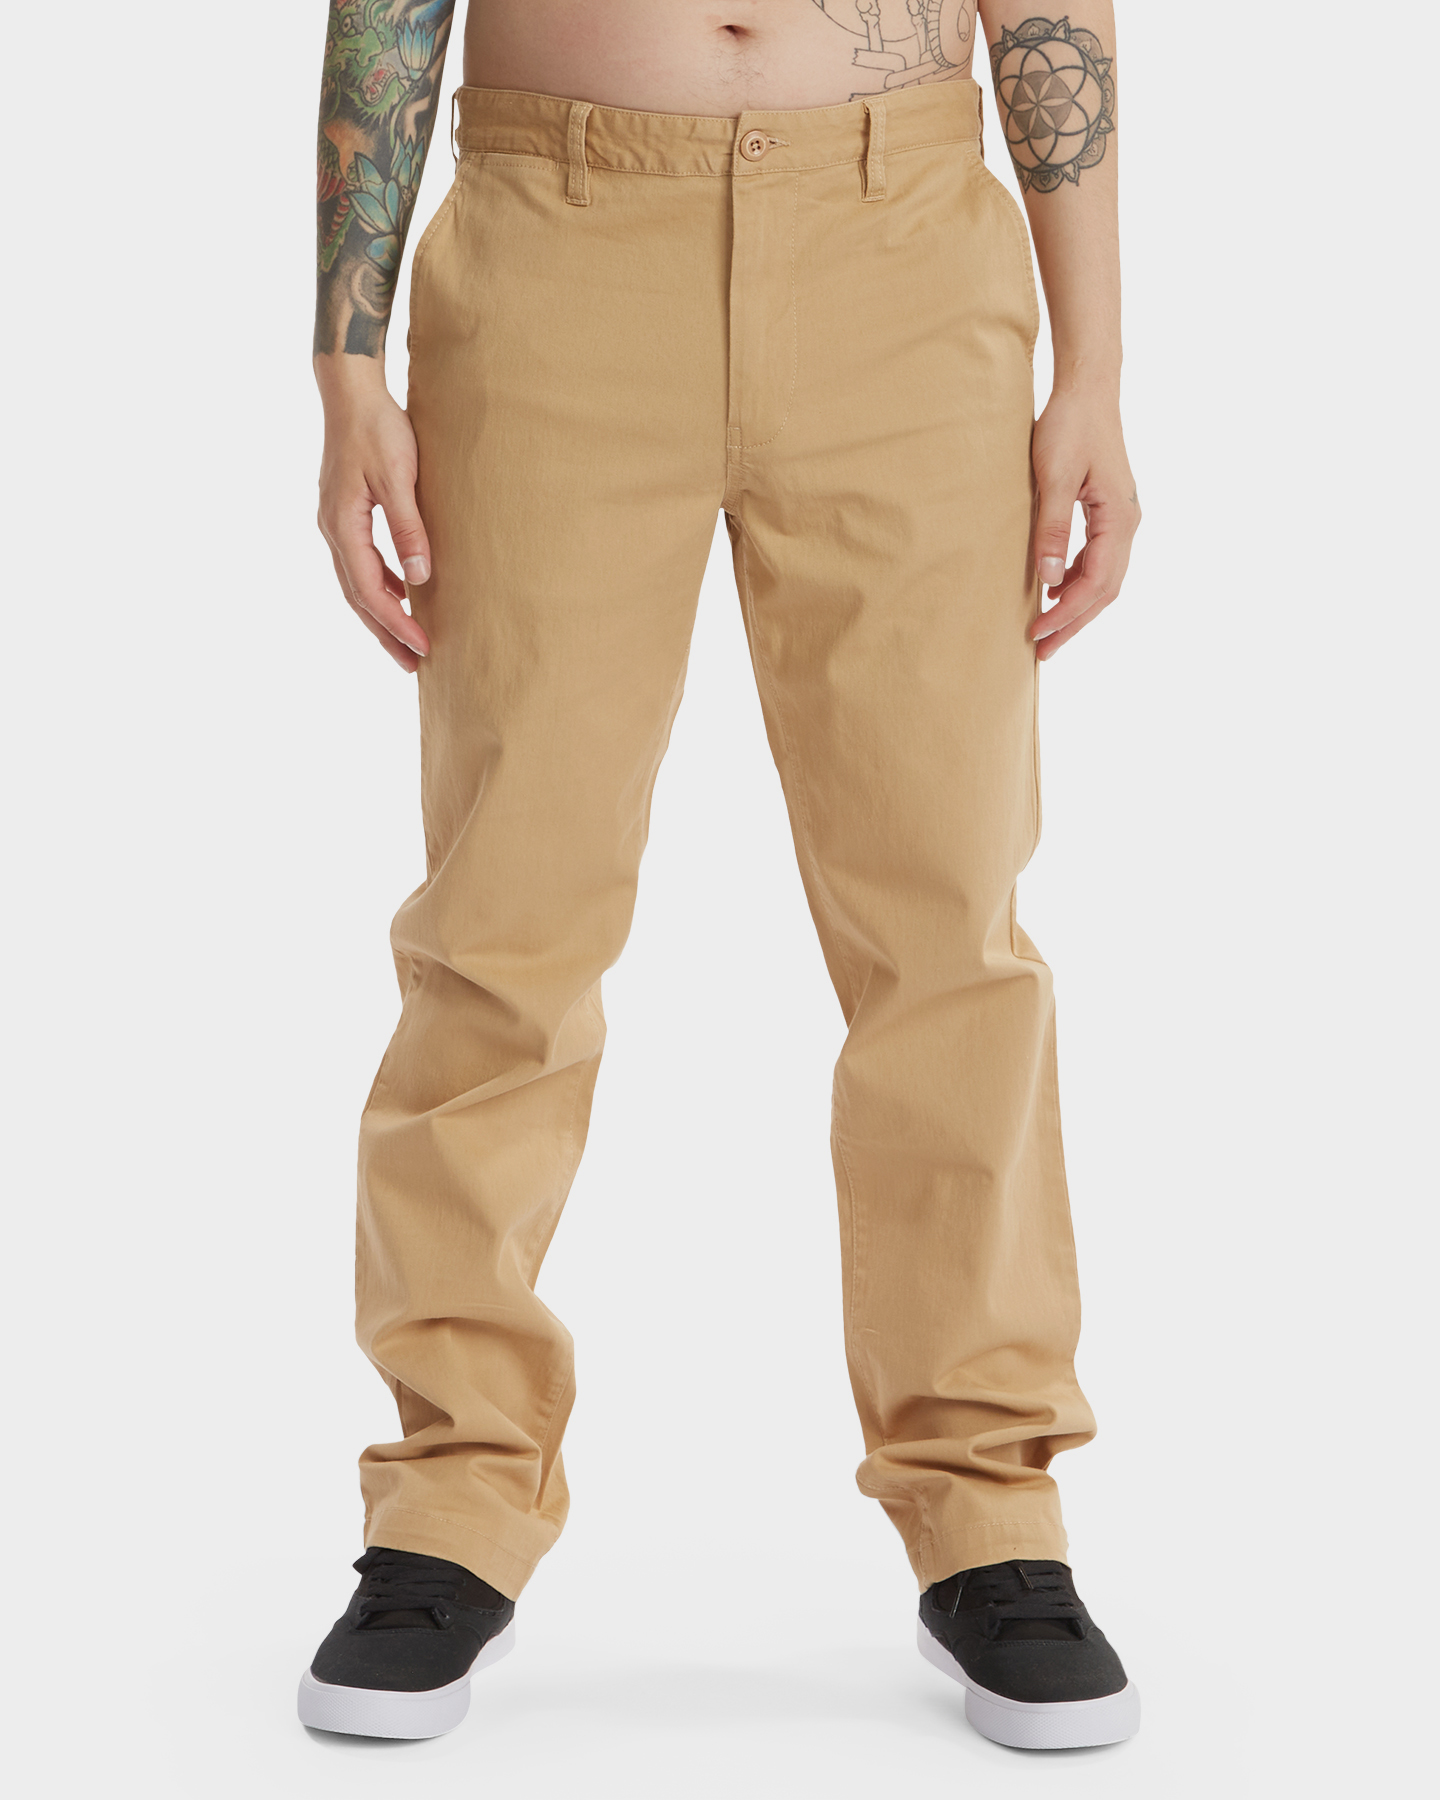 Dc Shoes Mens Worker Chino Pant - Incense | SurfStitch